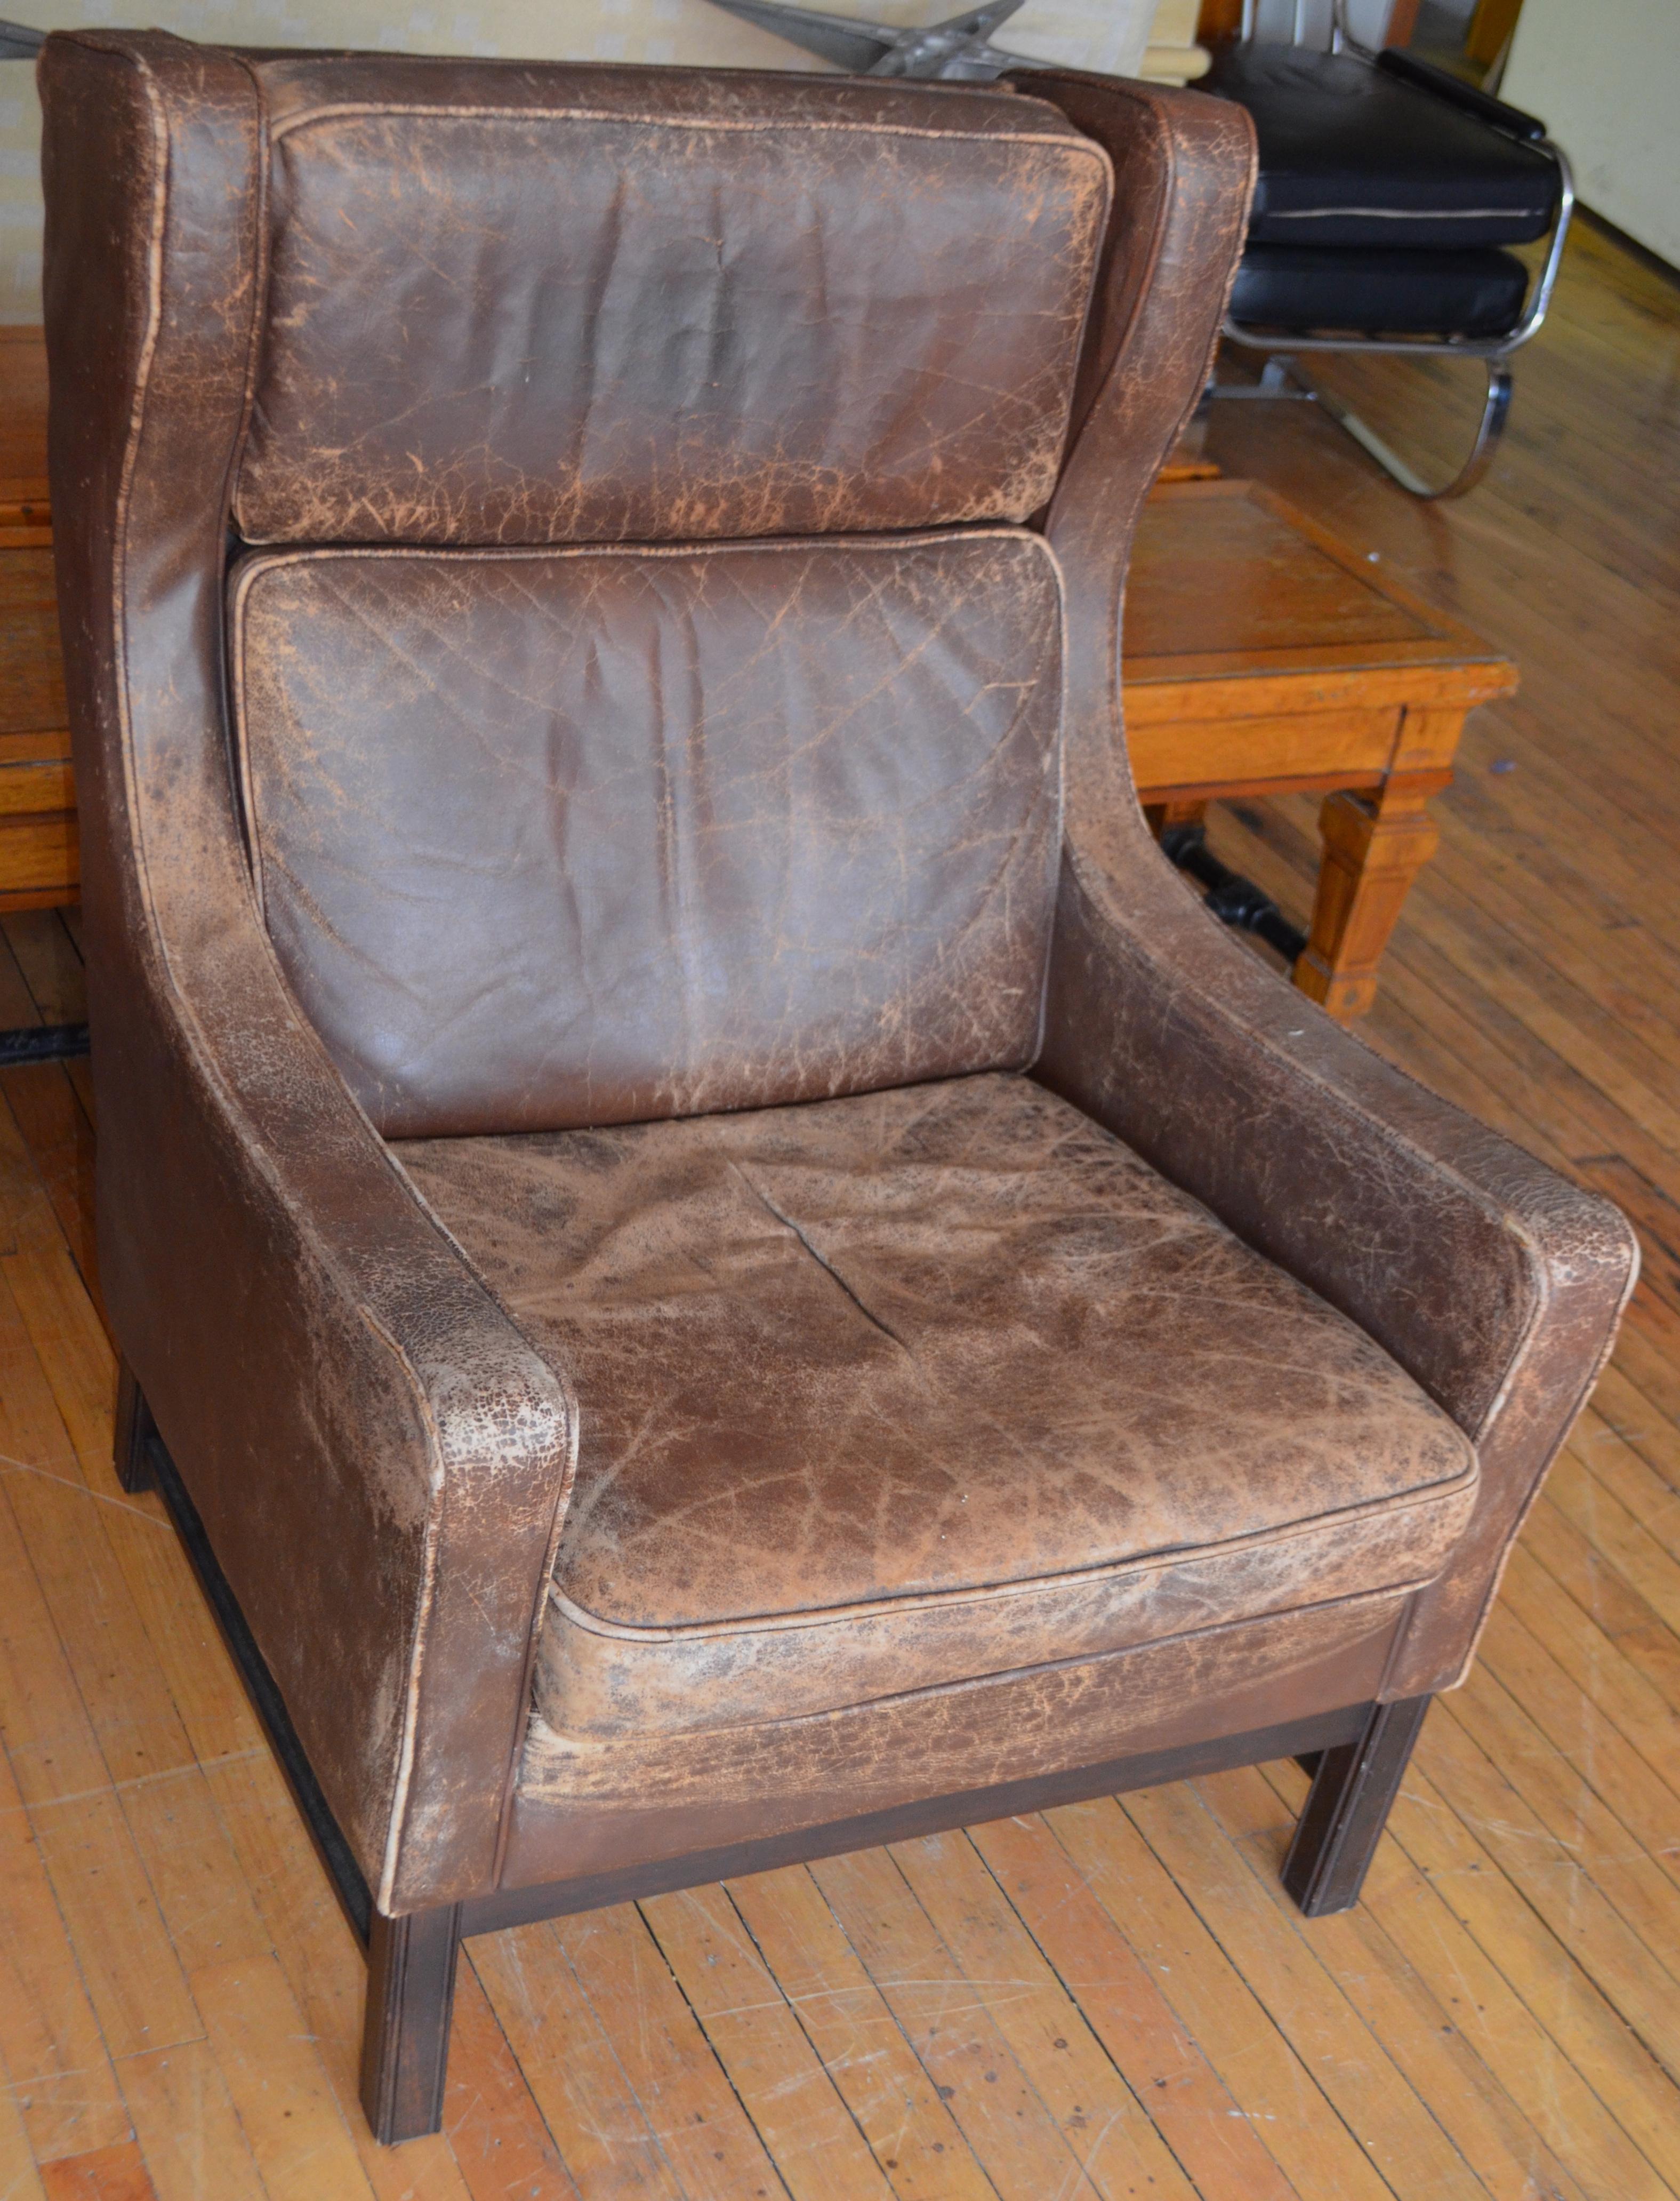 Leather club wingback chair from Edwardian England, early 20th century. The worn leather of this chair has such a hand as to embody all those who sat upon it. A furnishing from a Thomas Hardy novel where the vicar sat every Saturday evening with a